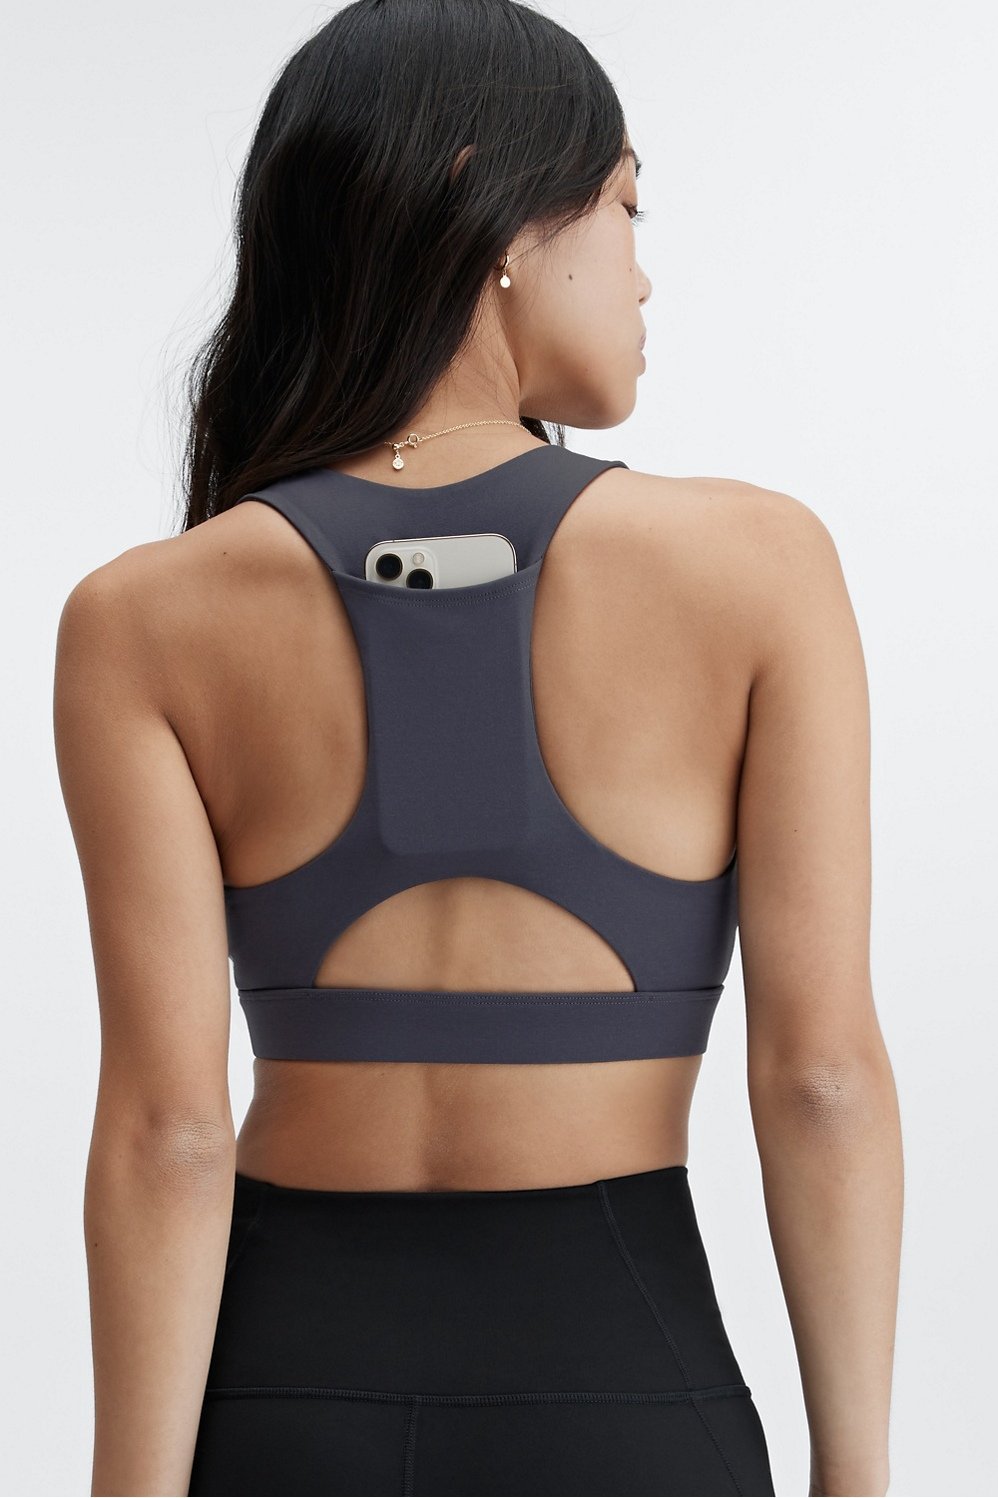 Sole Sports - Now available at Sole Sports the @oiselle Pockito Sports Bra!  This bra provides support, comfort and has pockets for storage! There is a  large center front pocket which can